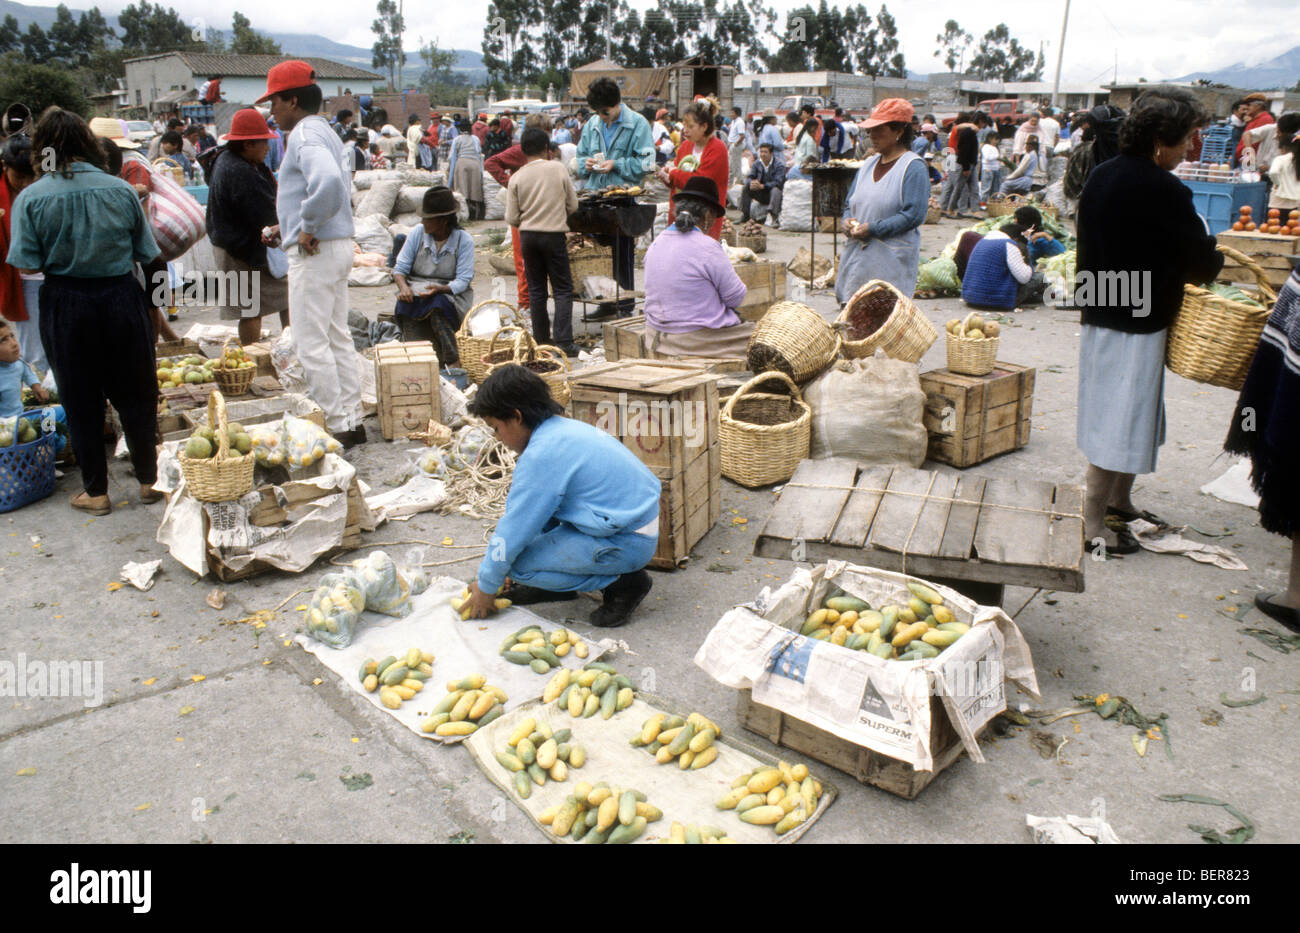 Young boy fruit seller spreads small yellow and green mangoes out on white cloths. Local upland Ecuador market. Stock Photo